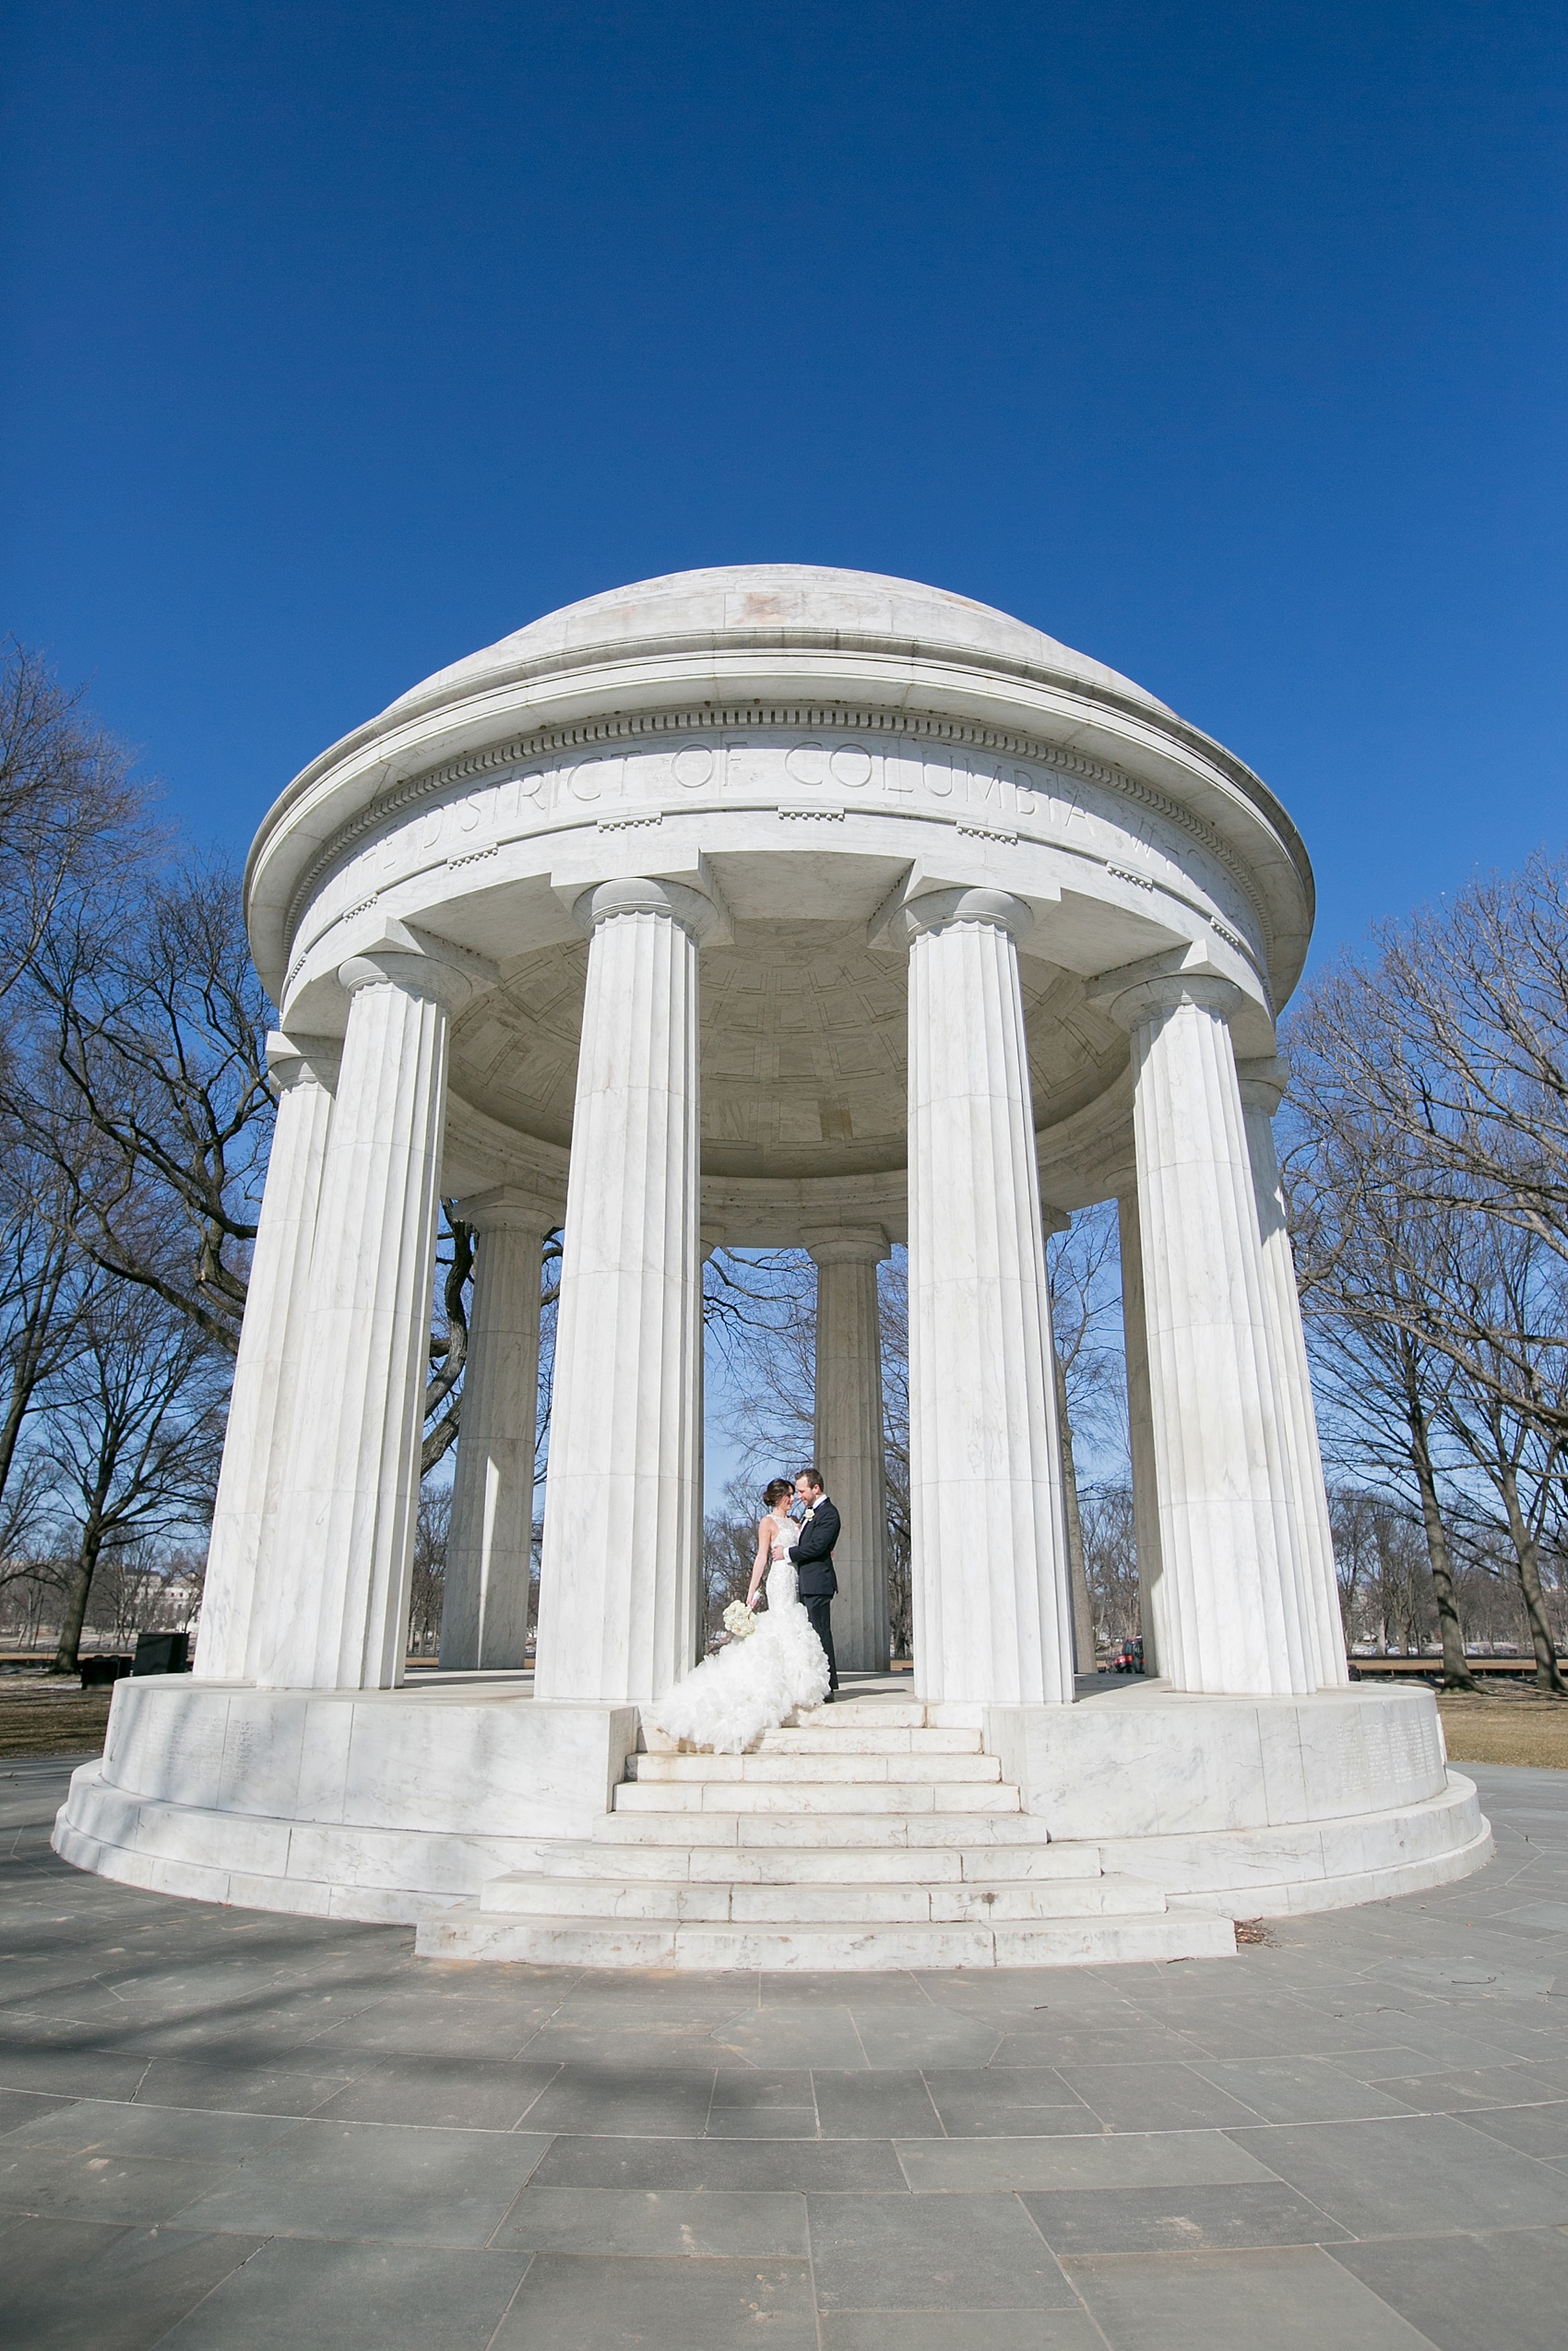 Washington, DC wedding photos by Mikkel Paige. The bride and groom take photos on the National Mall with the DC war memorial and stoic white columns.